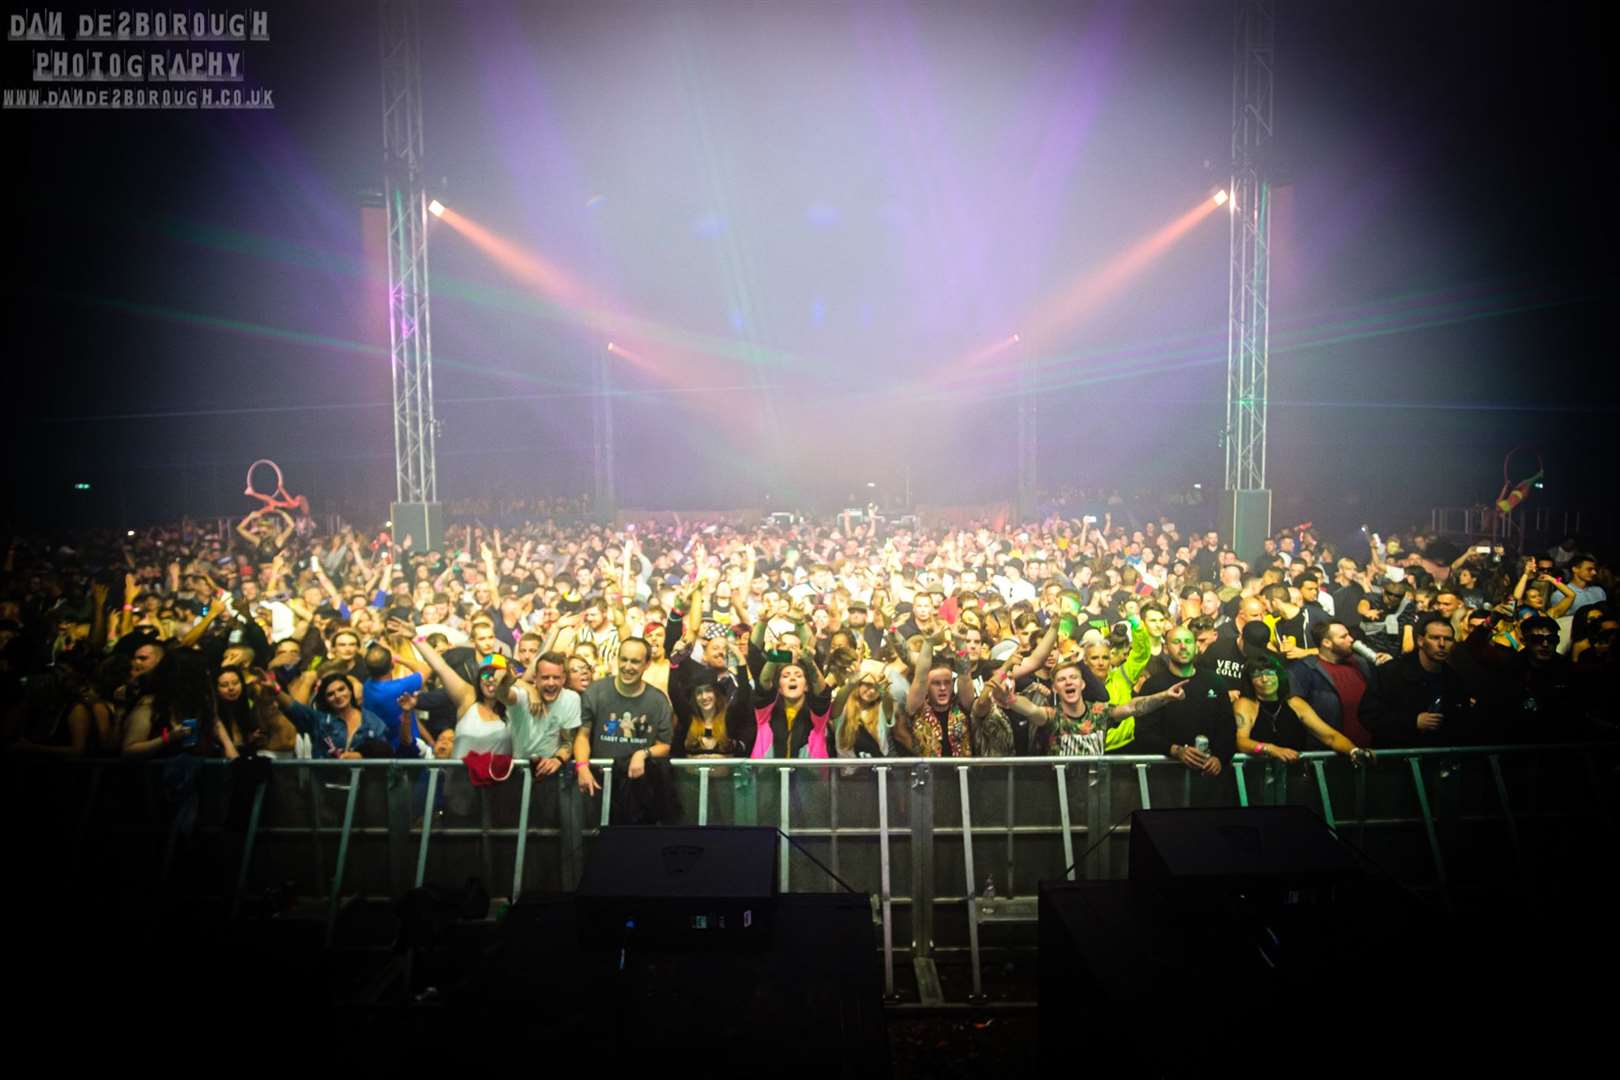 6,000 people attended Connected Festival in 2019. Credit: Dan Desborough